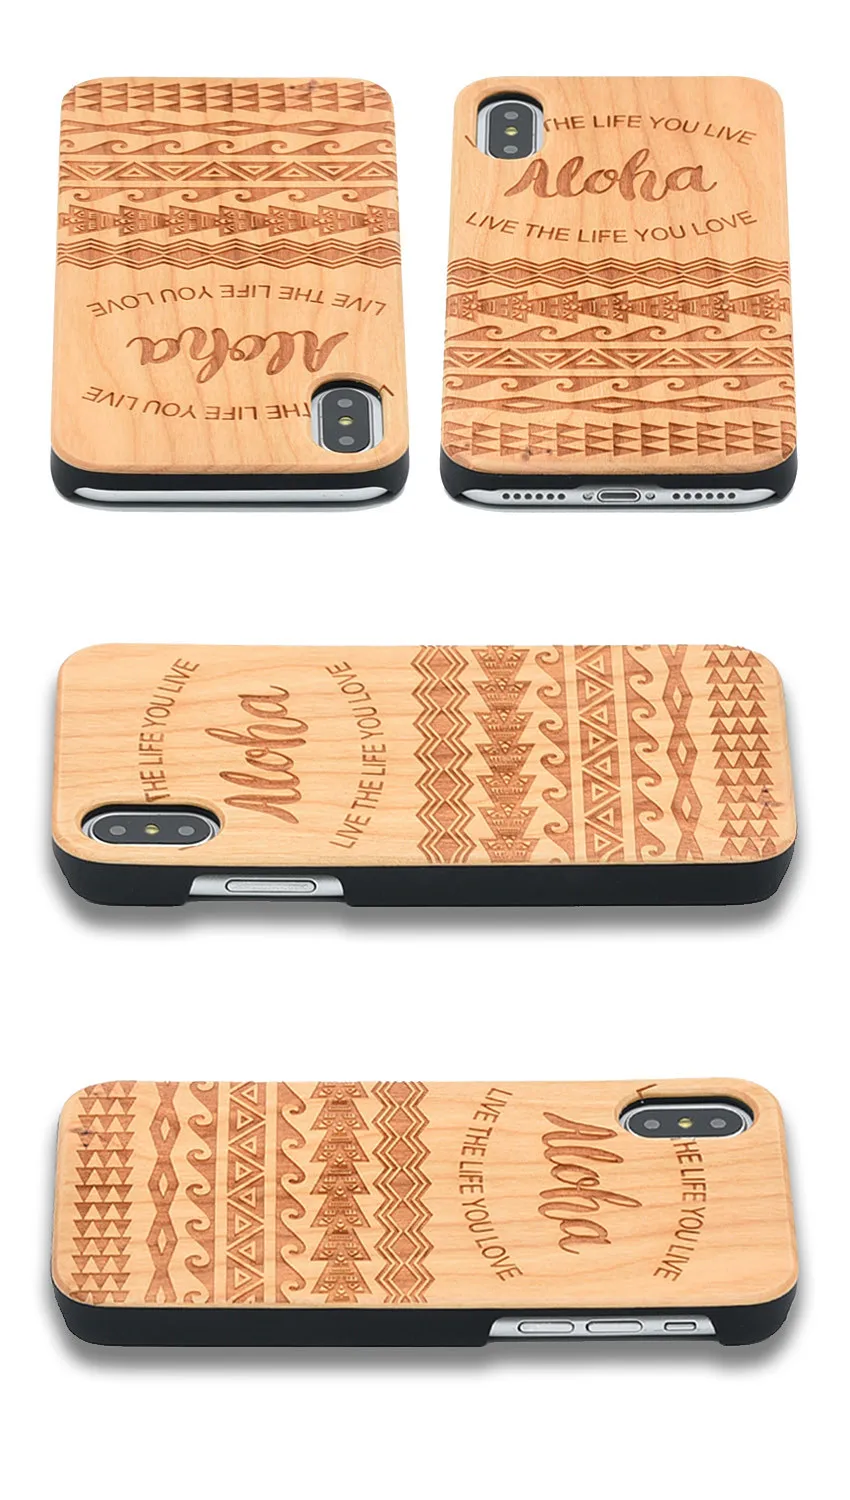 PEIPENG New Wood Phone Case For iPhone 6 6S 6 Plus 7 7Plus XS MAX XR Ultra-thin Cover Wooden High Quality Shockproof Protector thin phone case